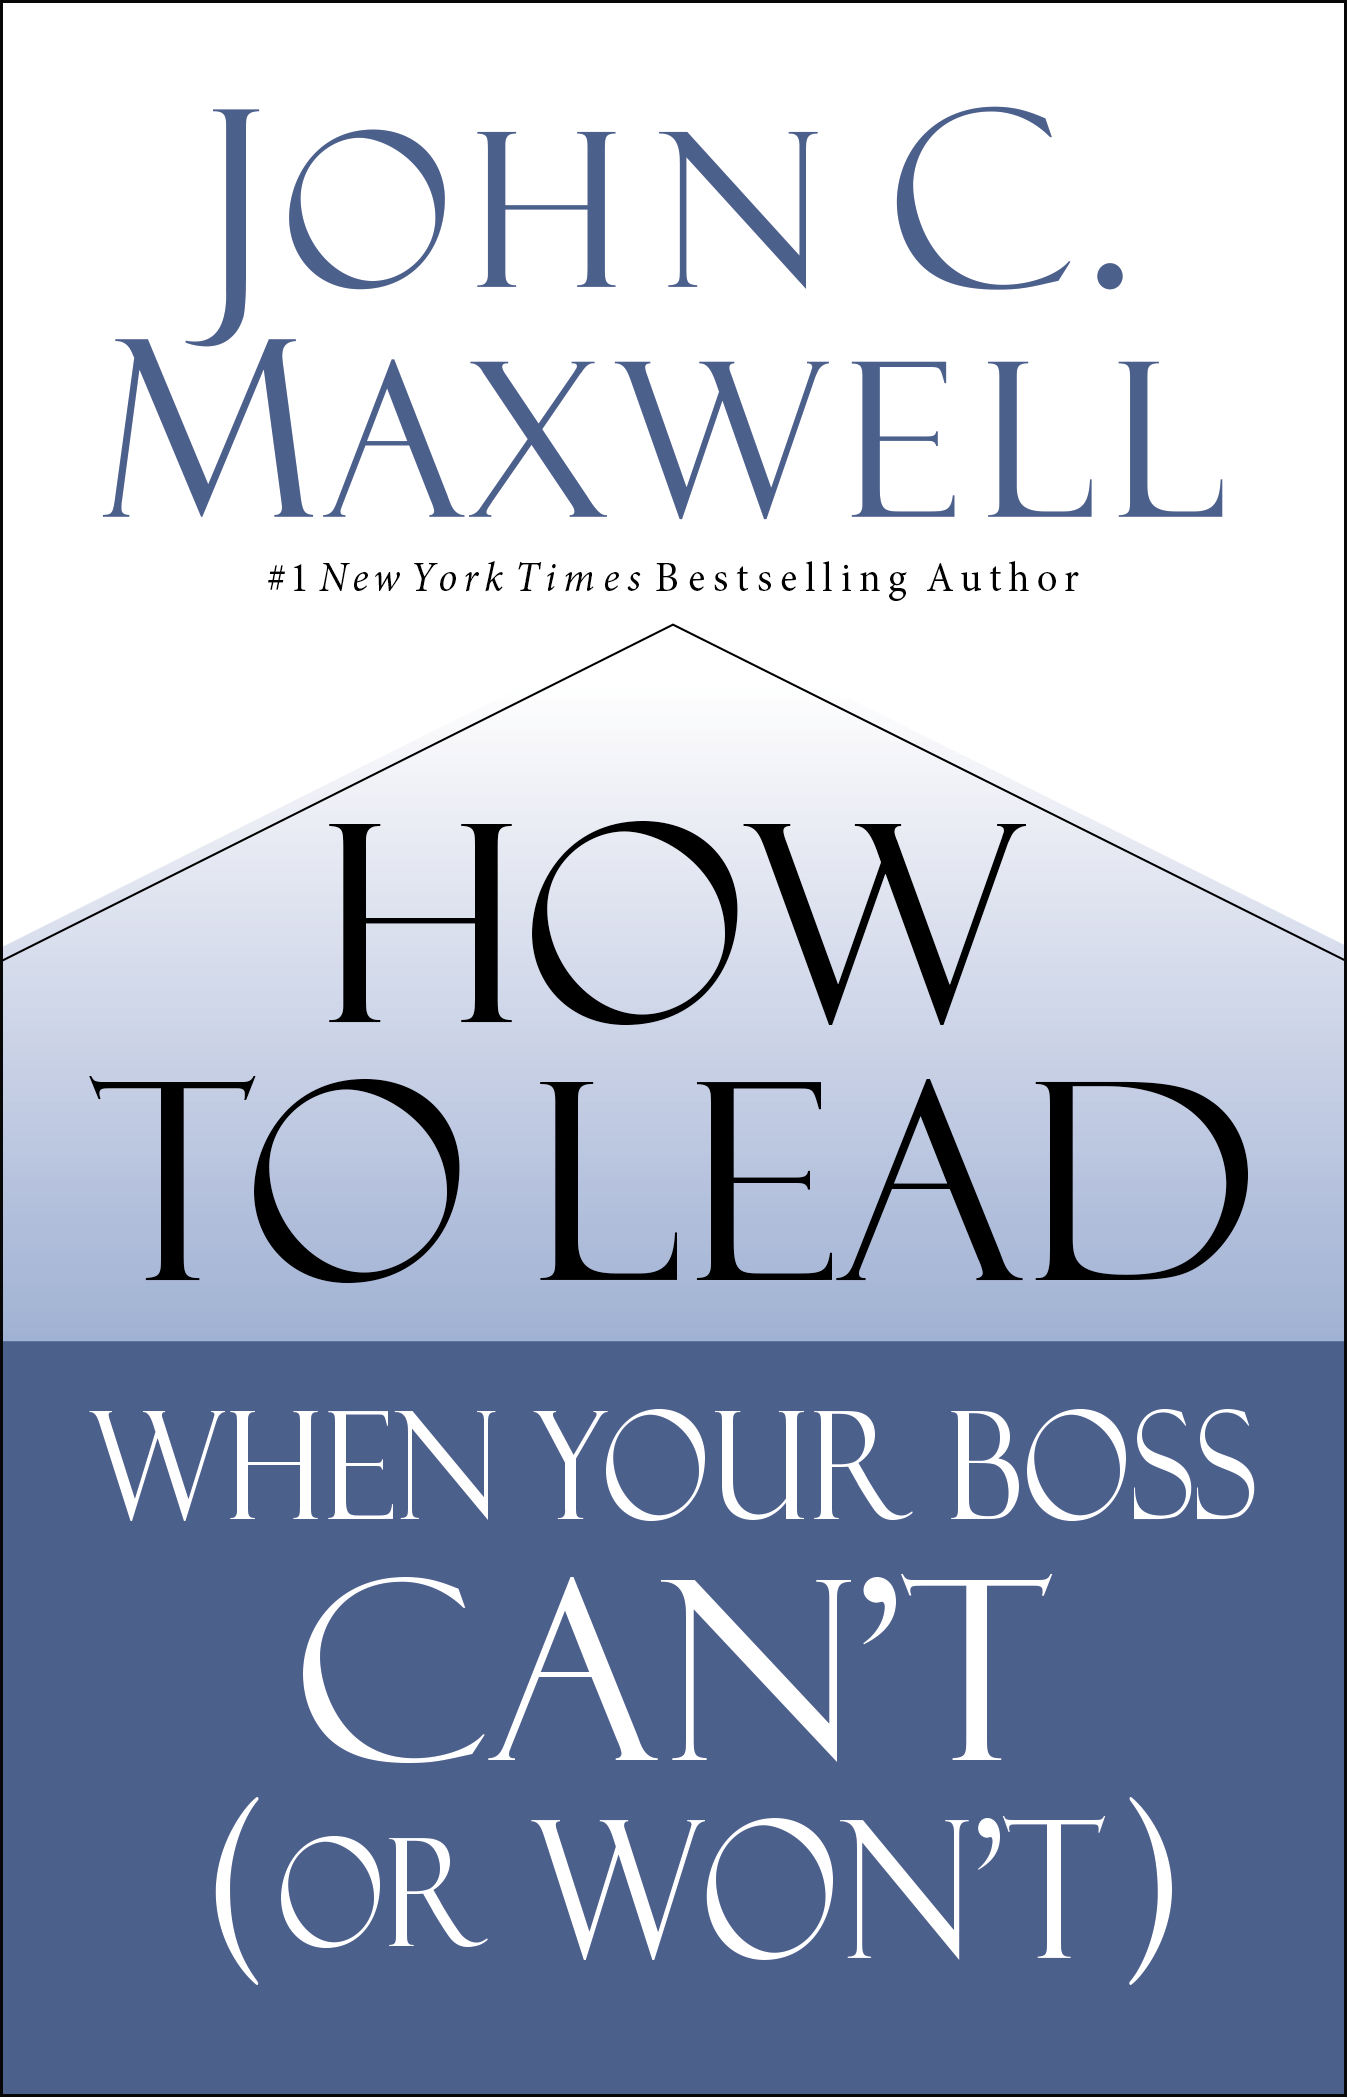 Image result for how to lead when your boss can't or won't